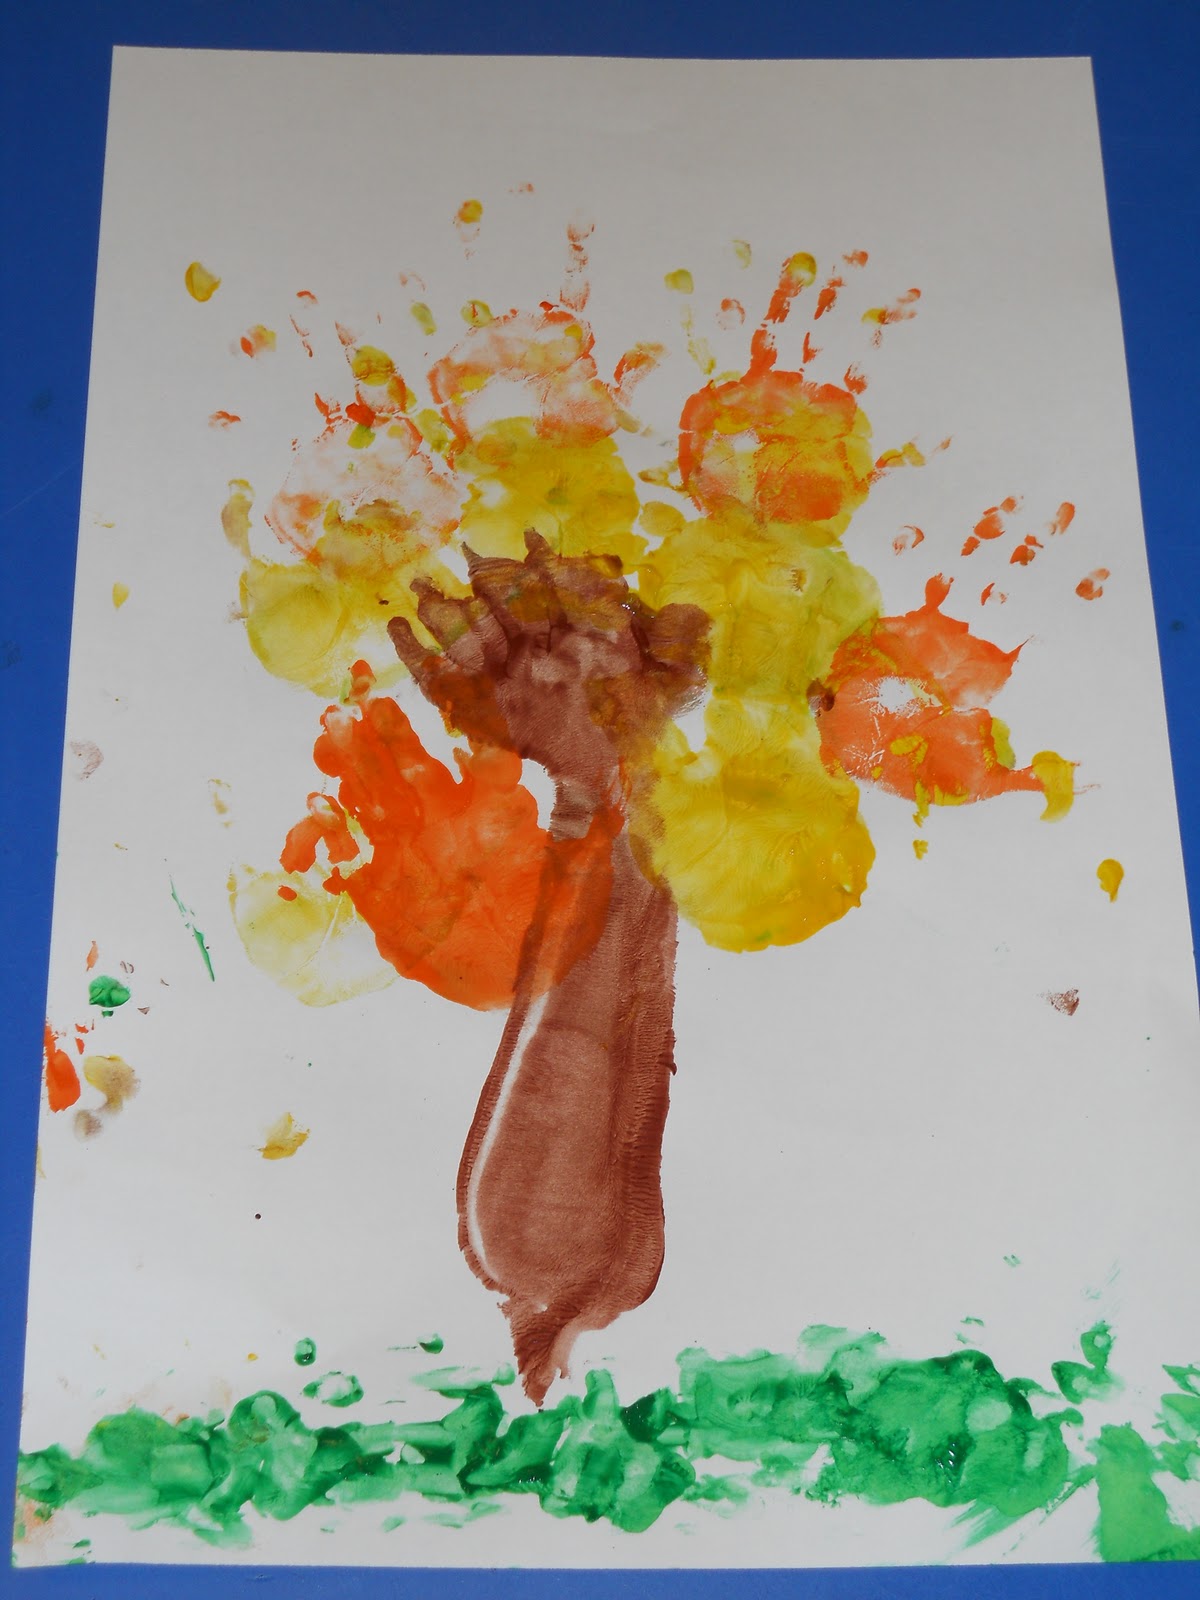 Learning and Teaching With Preschoolers: Blooming Tree Handprints